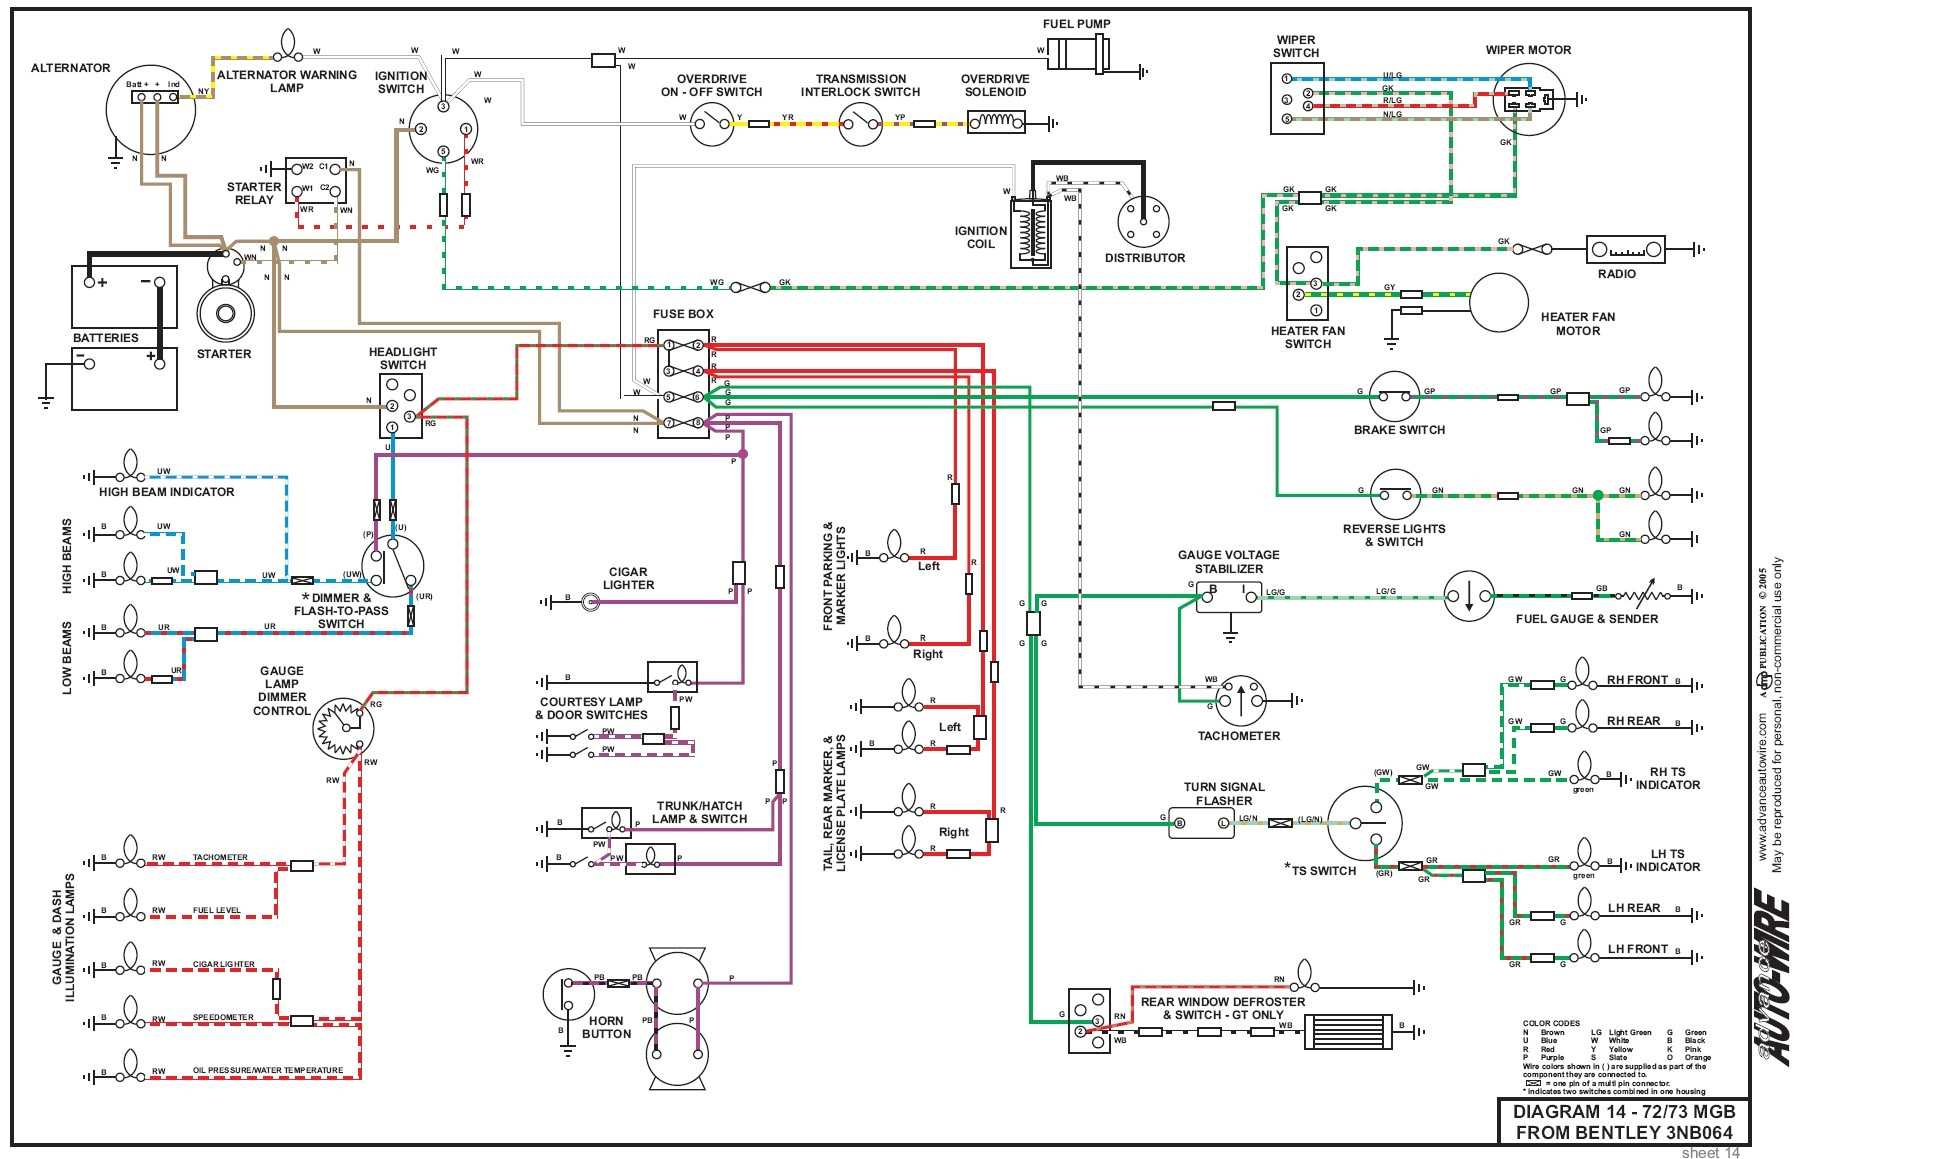 wiring diagram for 1968 mgb lights extended wiring diagram 1980 mgb wiring schematic schema diagram database